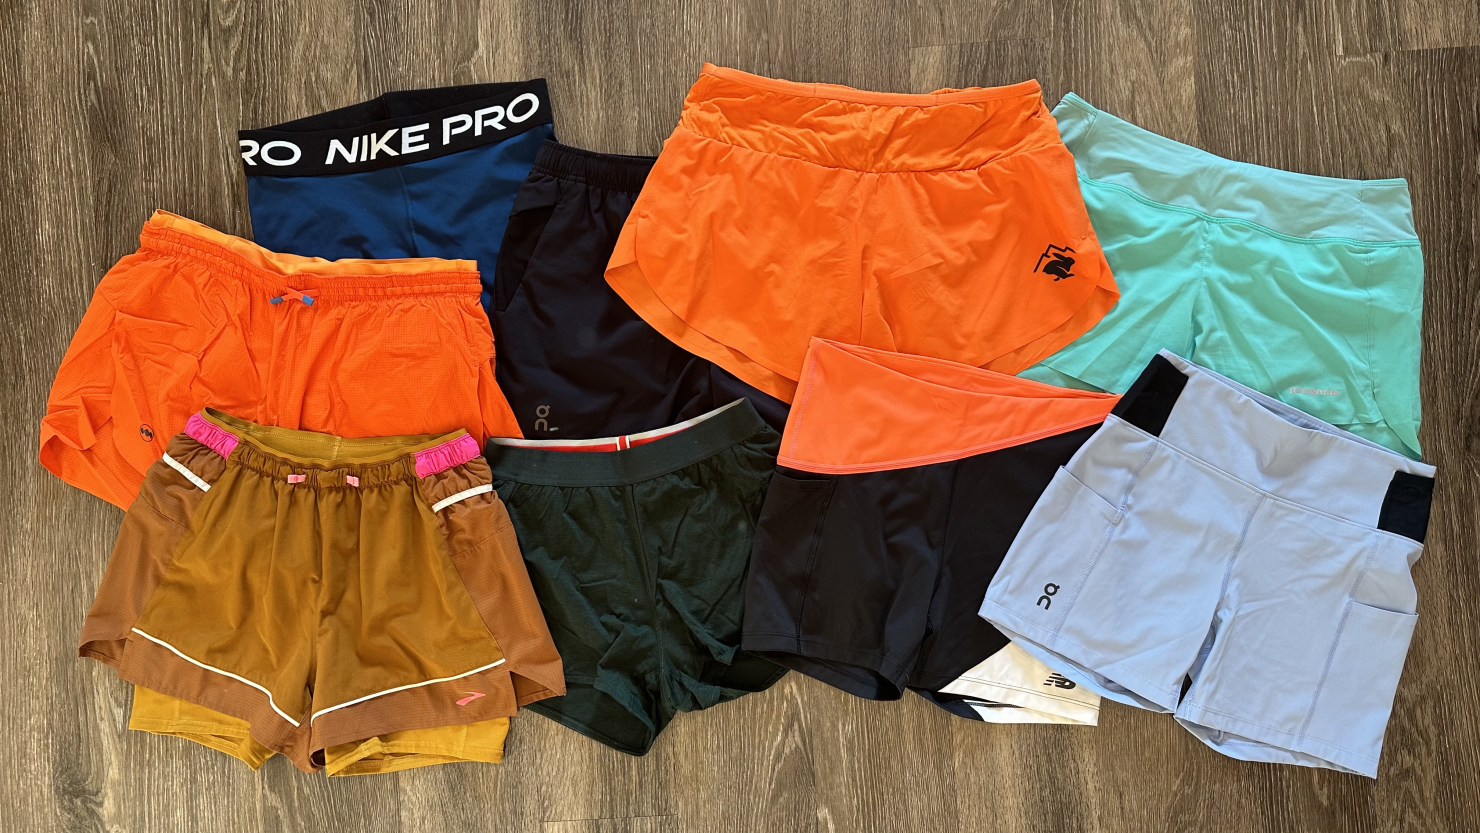 Janji Shorts Review: Are these the best running shorts? - Reviewed